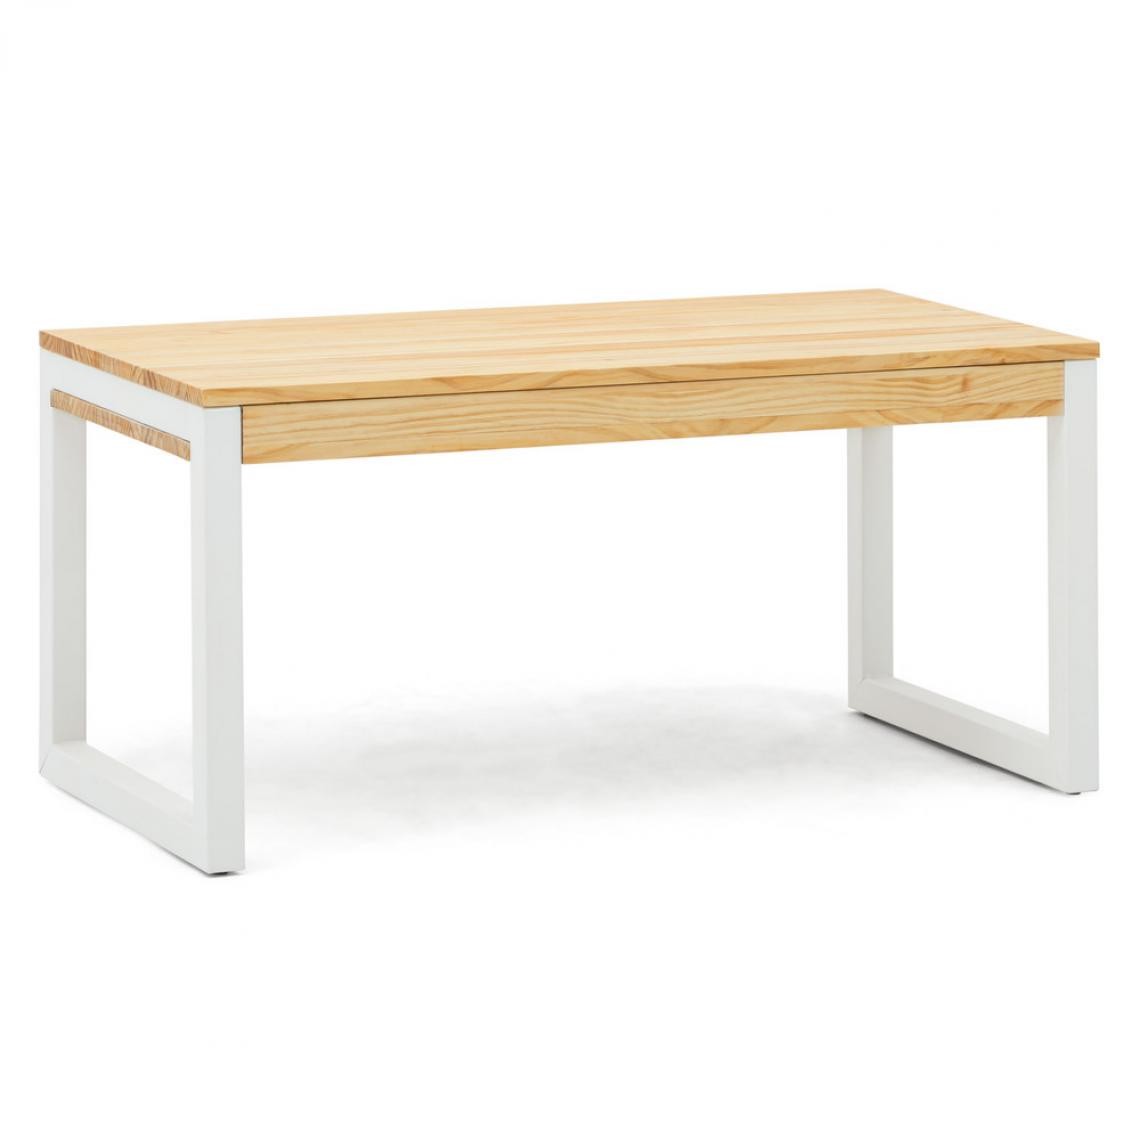 BOX FURNITURE - Table basse relevable iCub Strong ECO 50x100x52 cm 18mm Blanc Naturel - Box Furniture - Tables basses